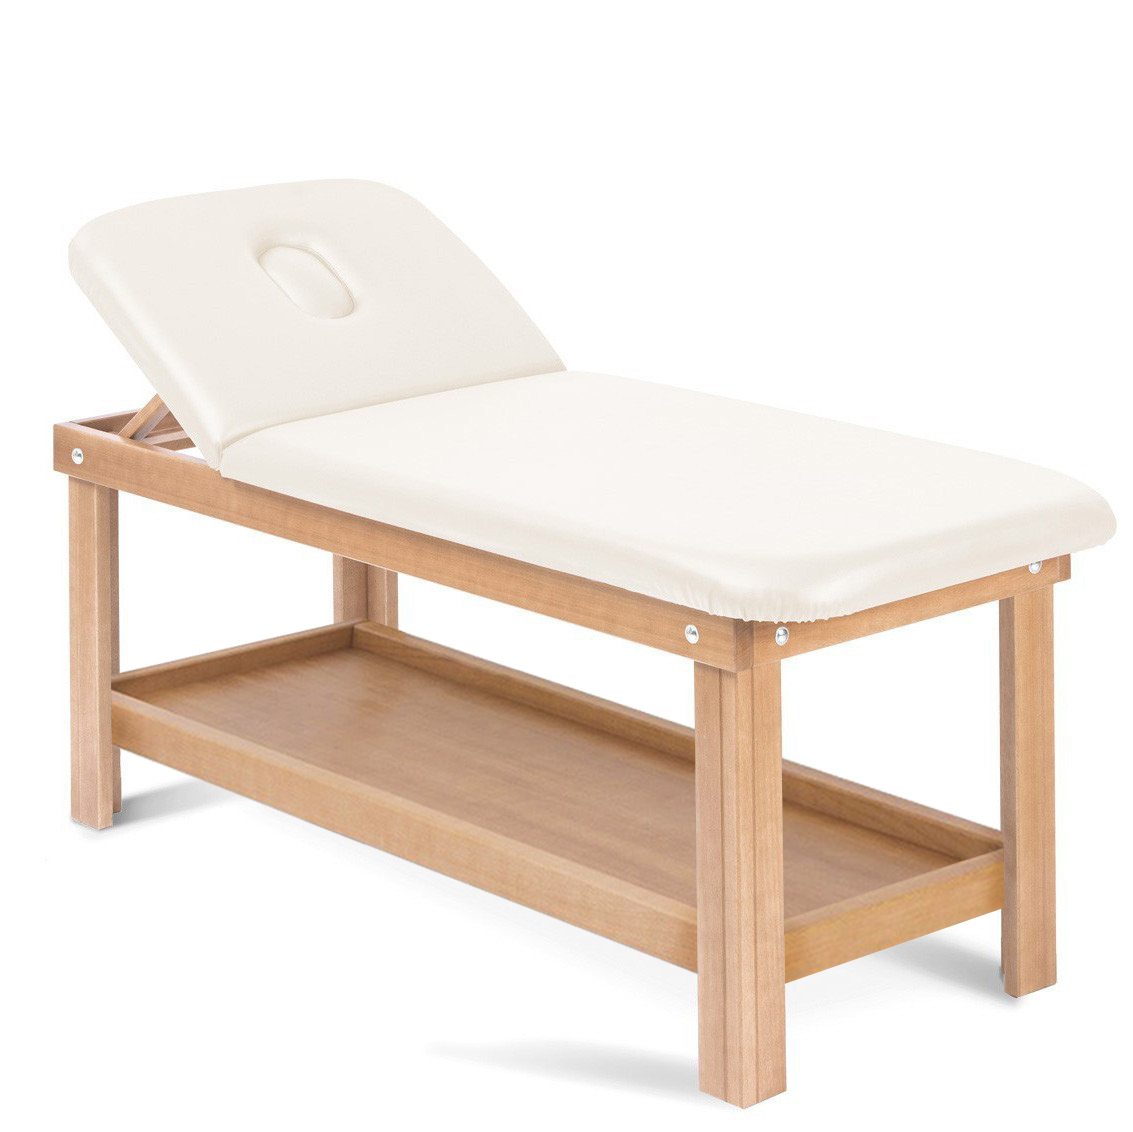 Wooden beauty treatment couch with 1 joint, face hole and table top